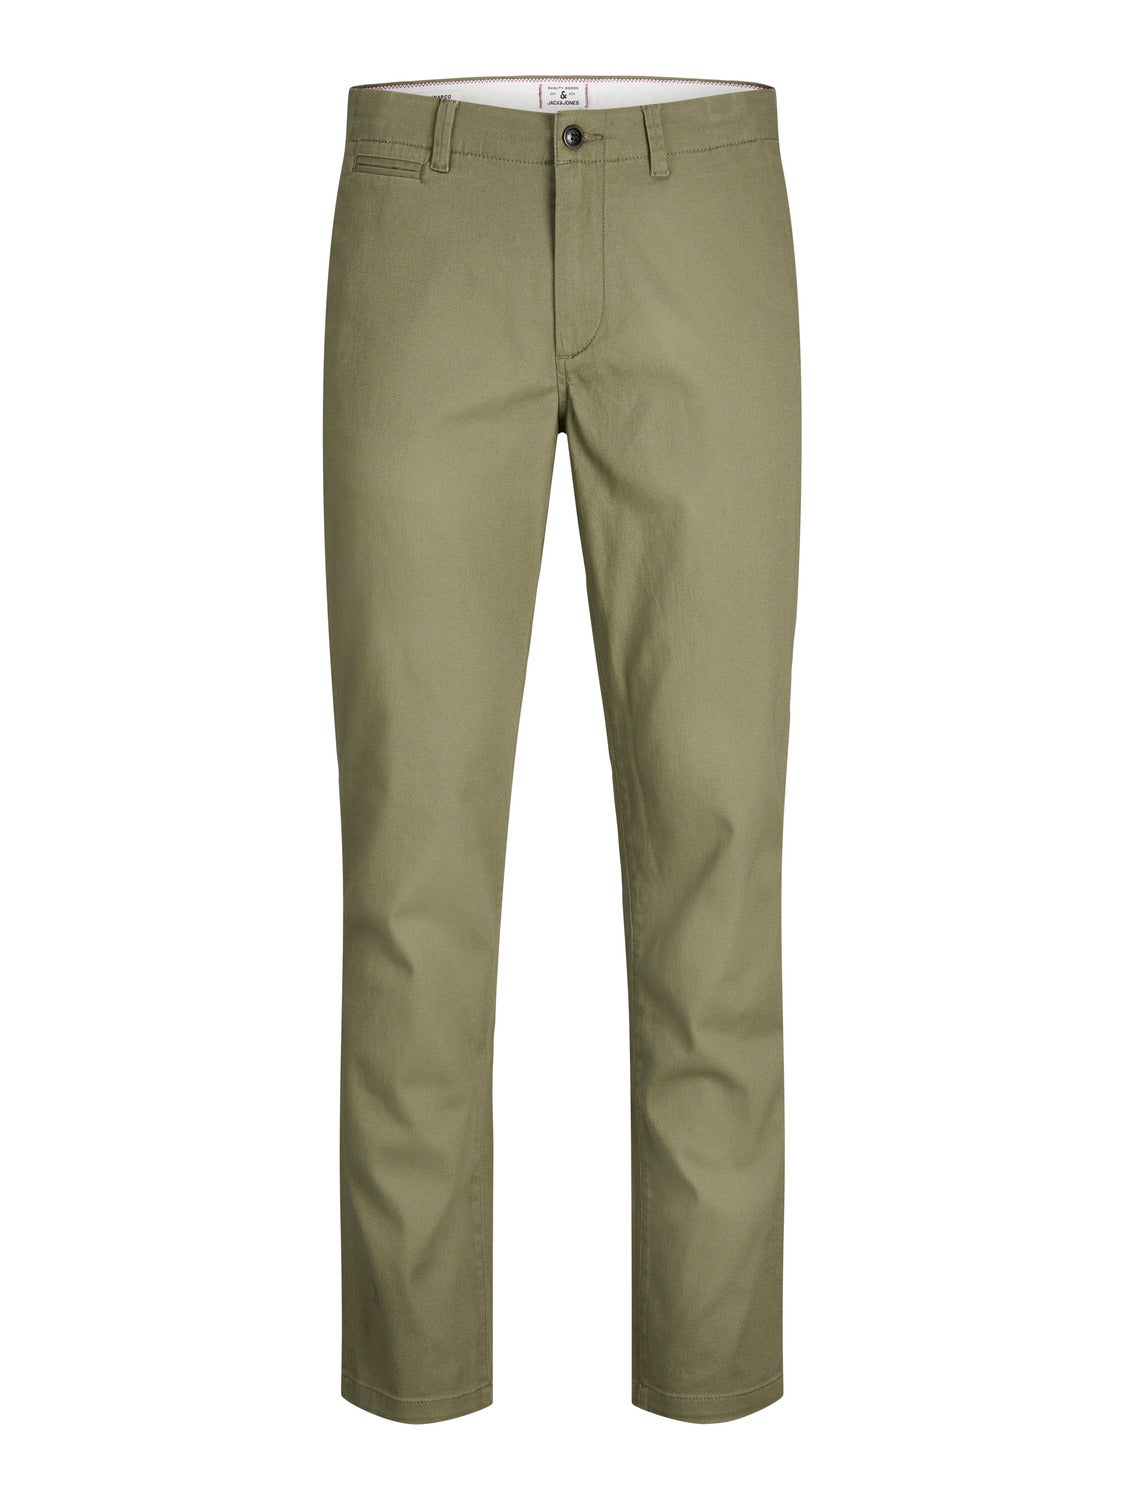 Donegal Corduroy Five Pocket Trousers in Rolling Sand – Blue Owl Workshop